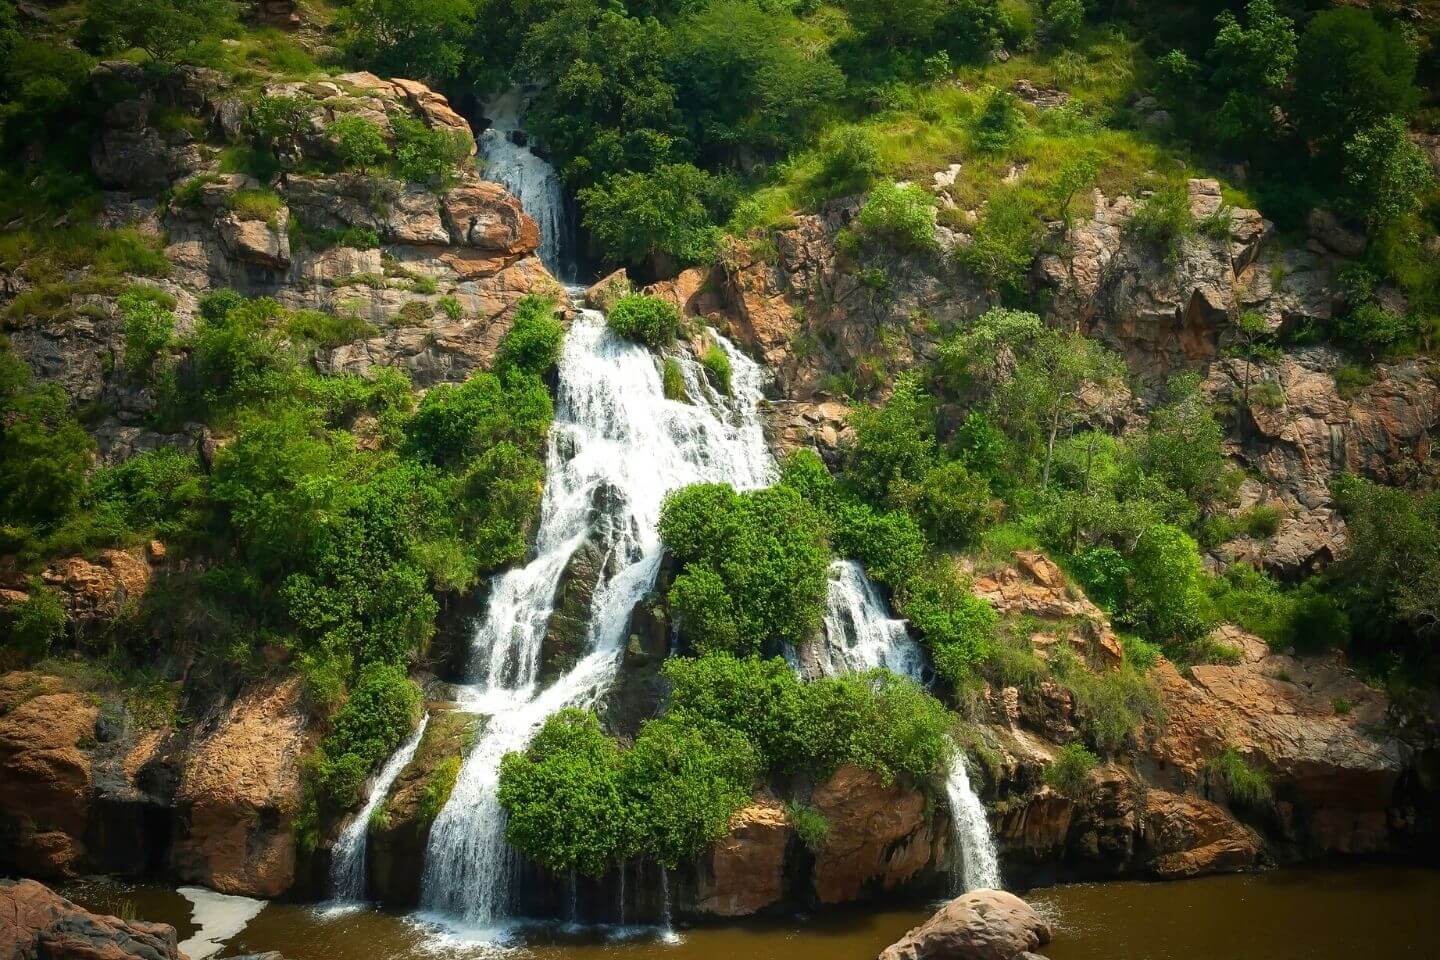 Chunchi Falls is one of the best Waterfalls to see near Bangalore within 100 km